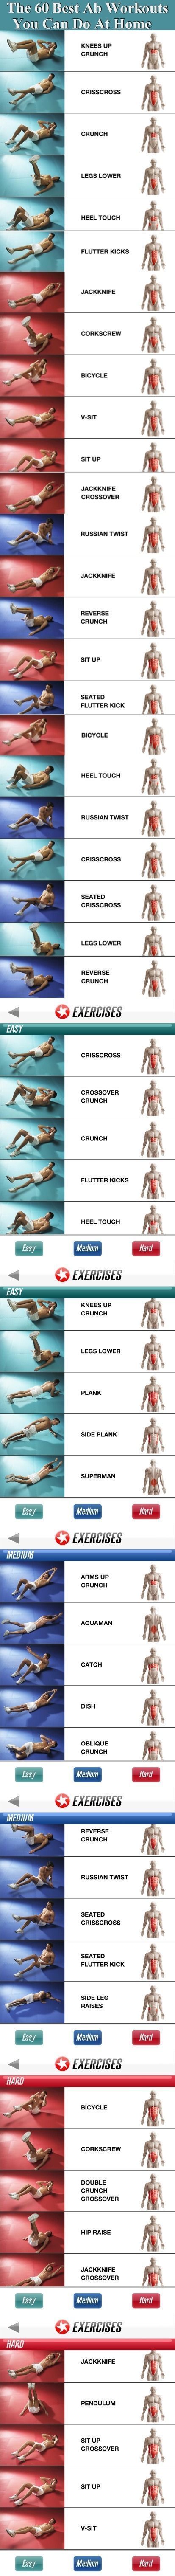 Abs Workout Chart Step By Step